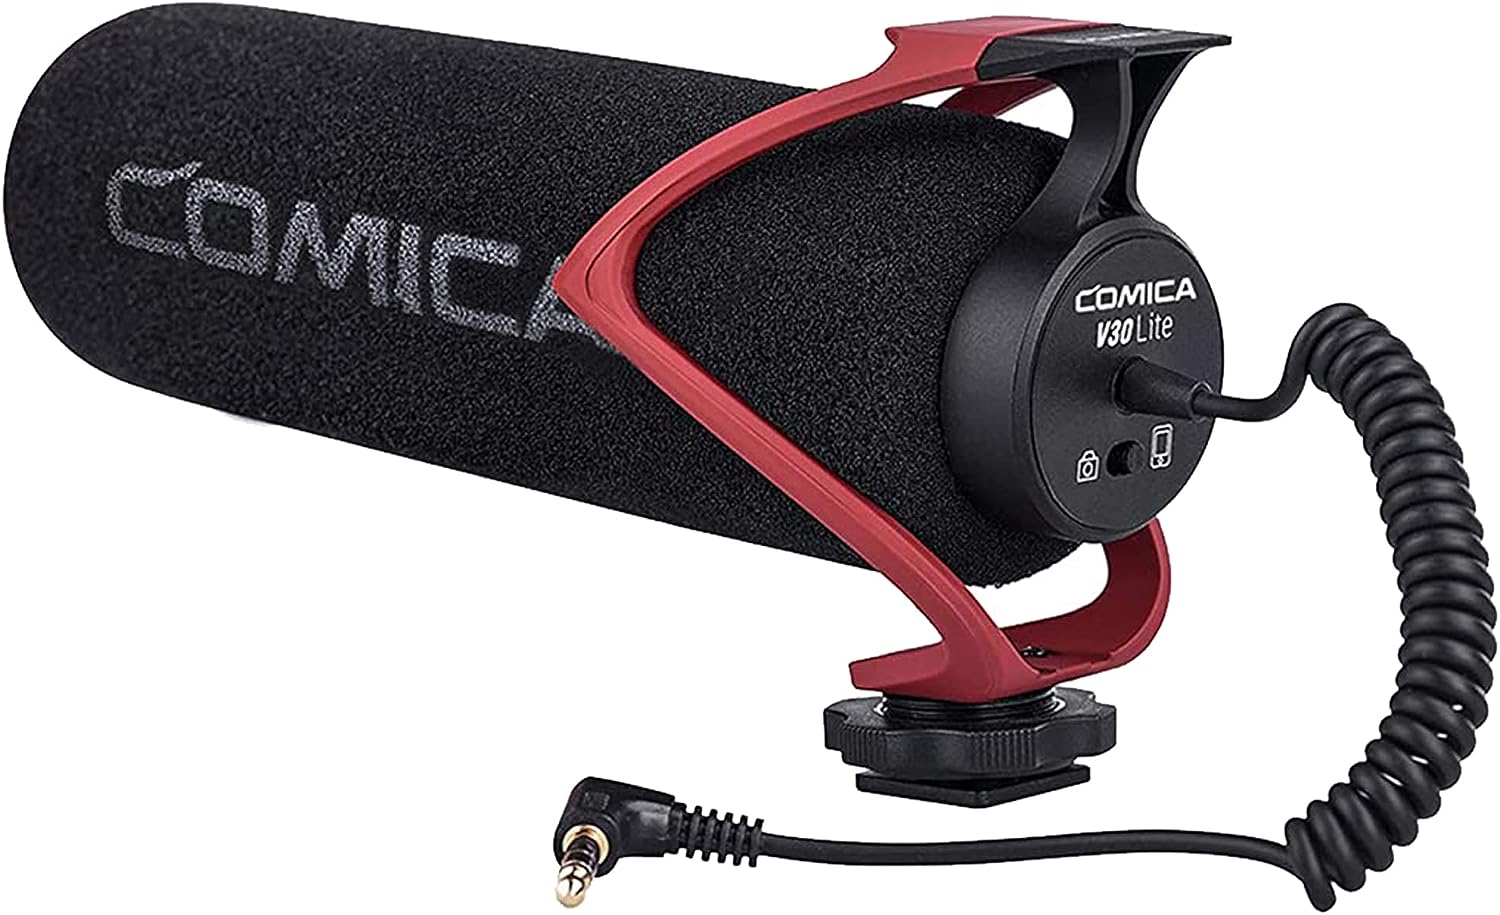 Choosing the Right Microphone for Your DSLR